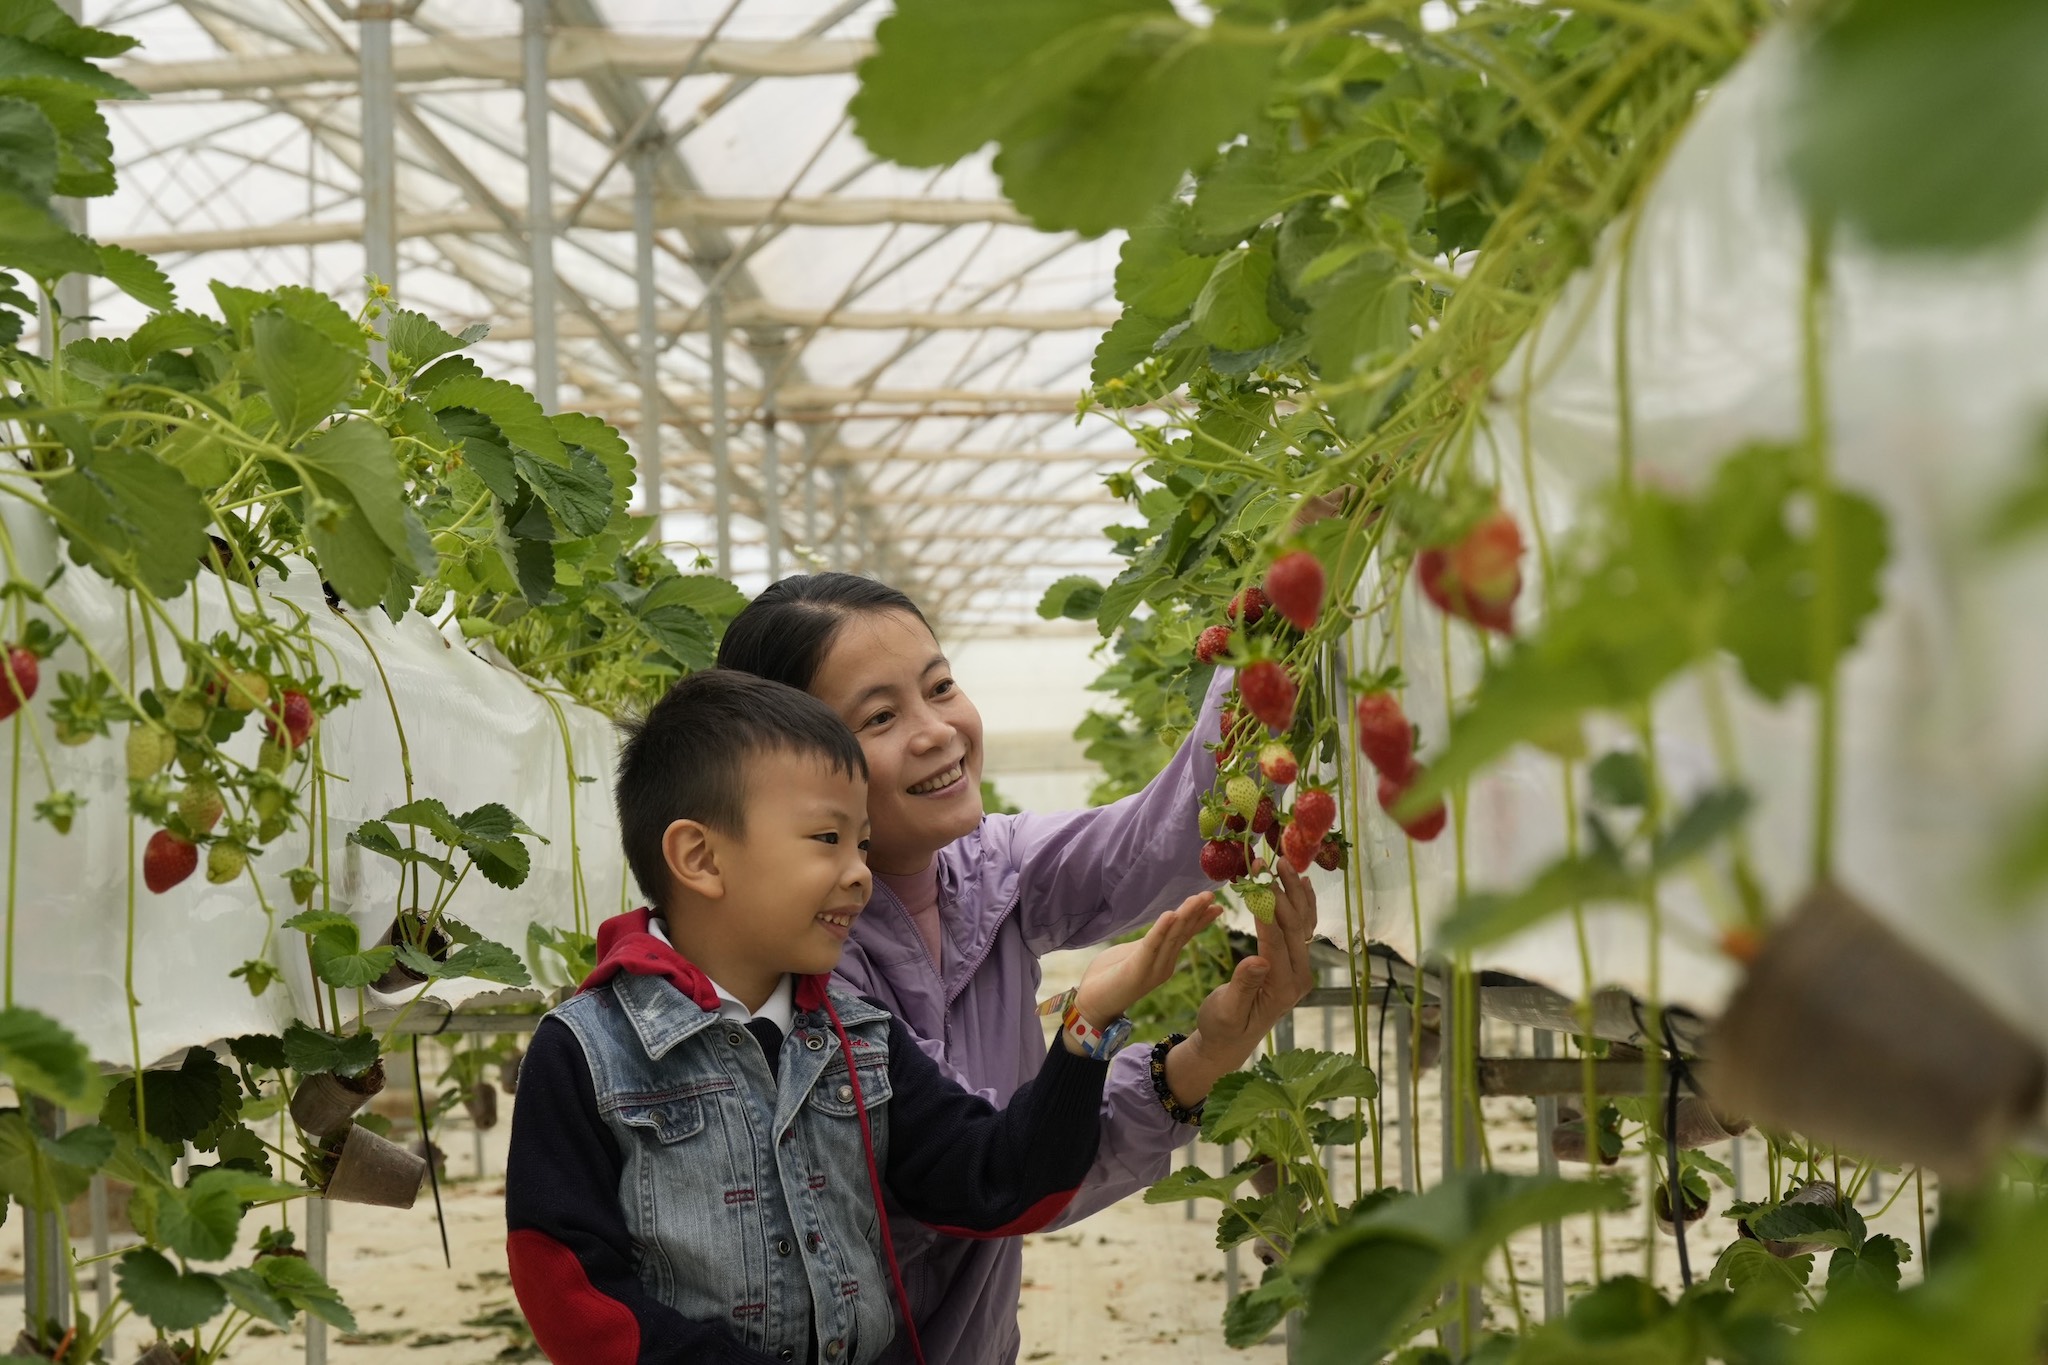 Tourists experience strawberry picking at the garden in Mang Den. Photo: Bui Viet Ha